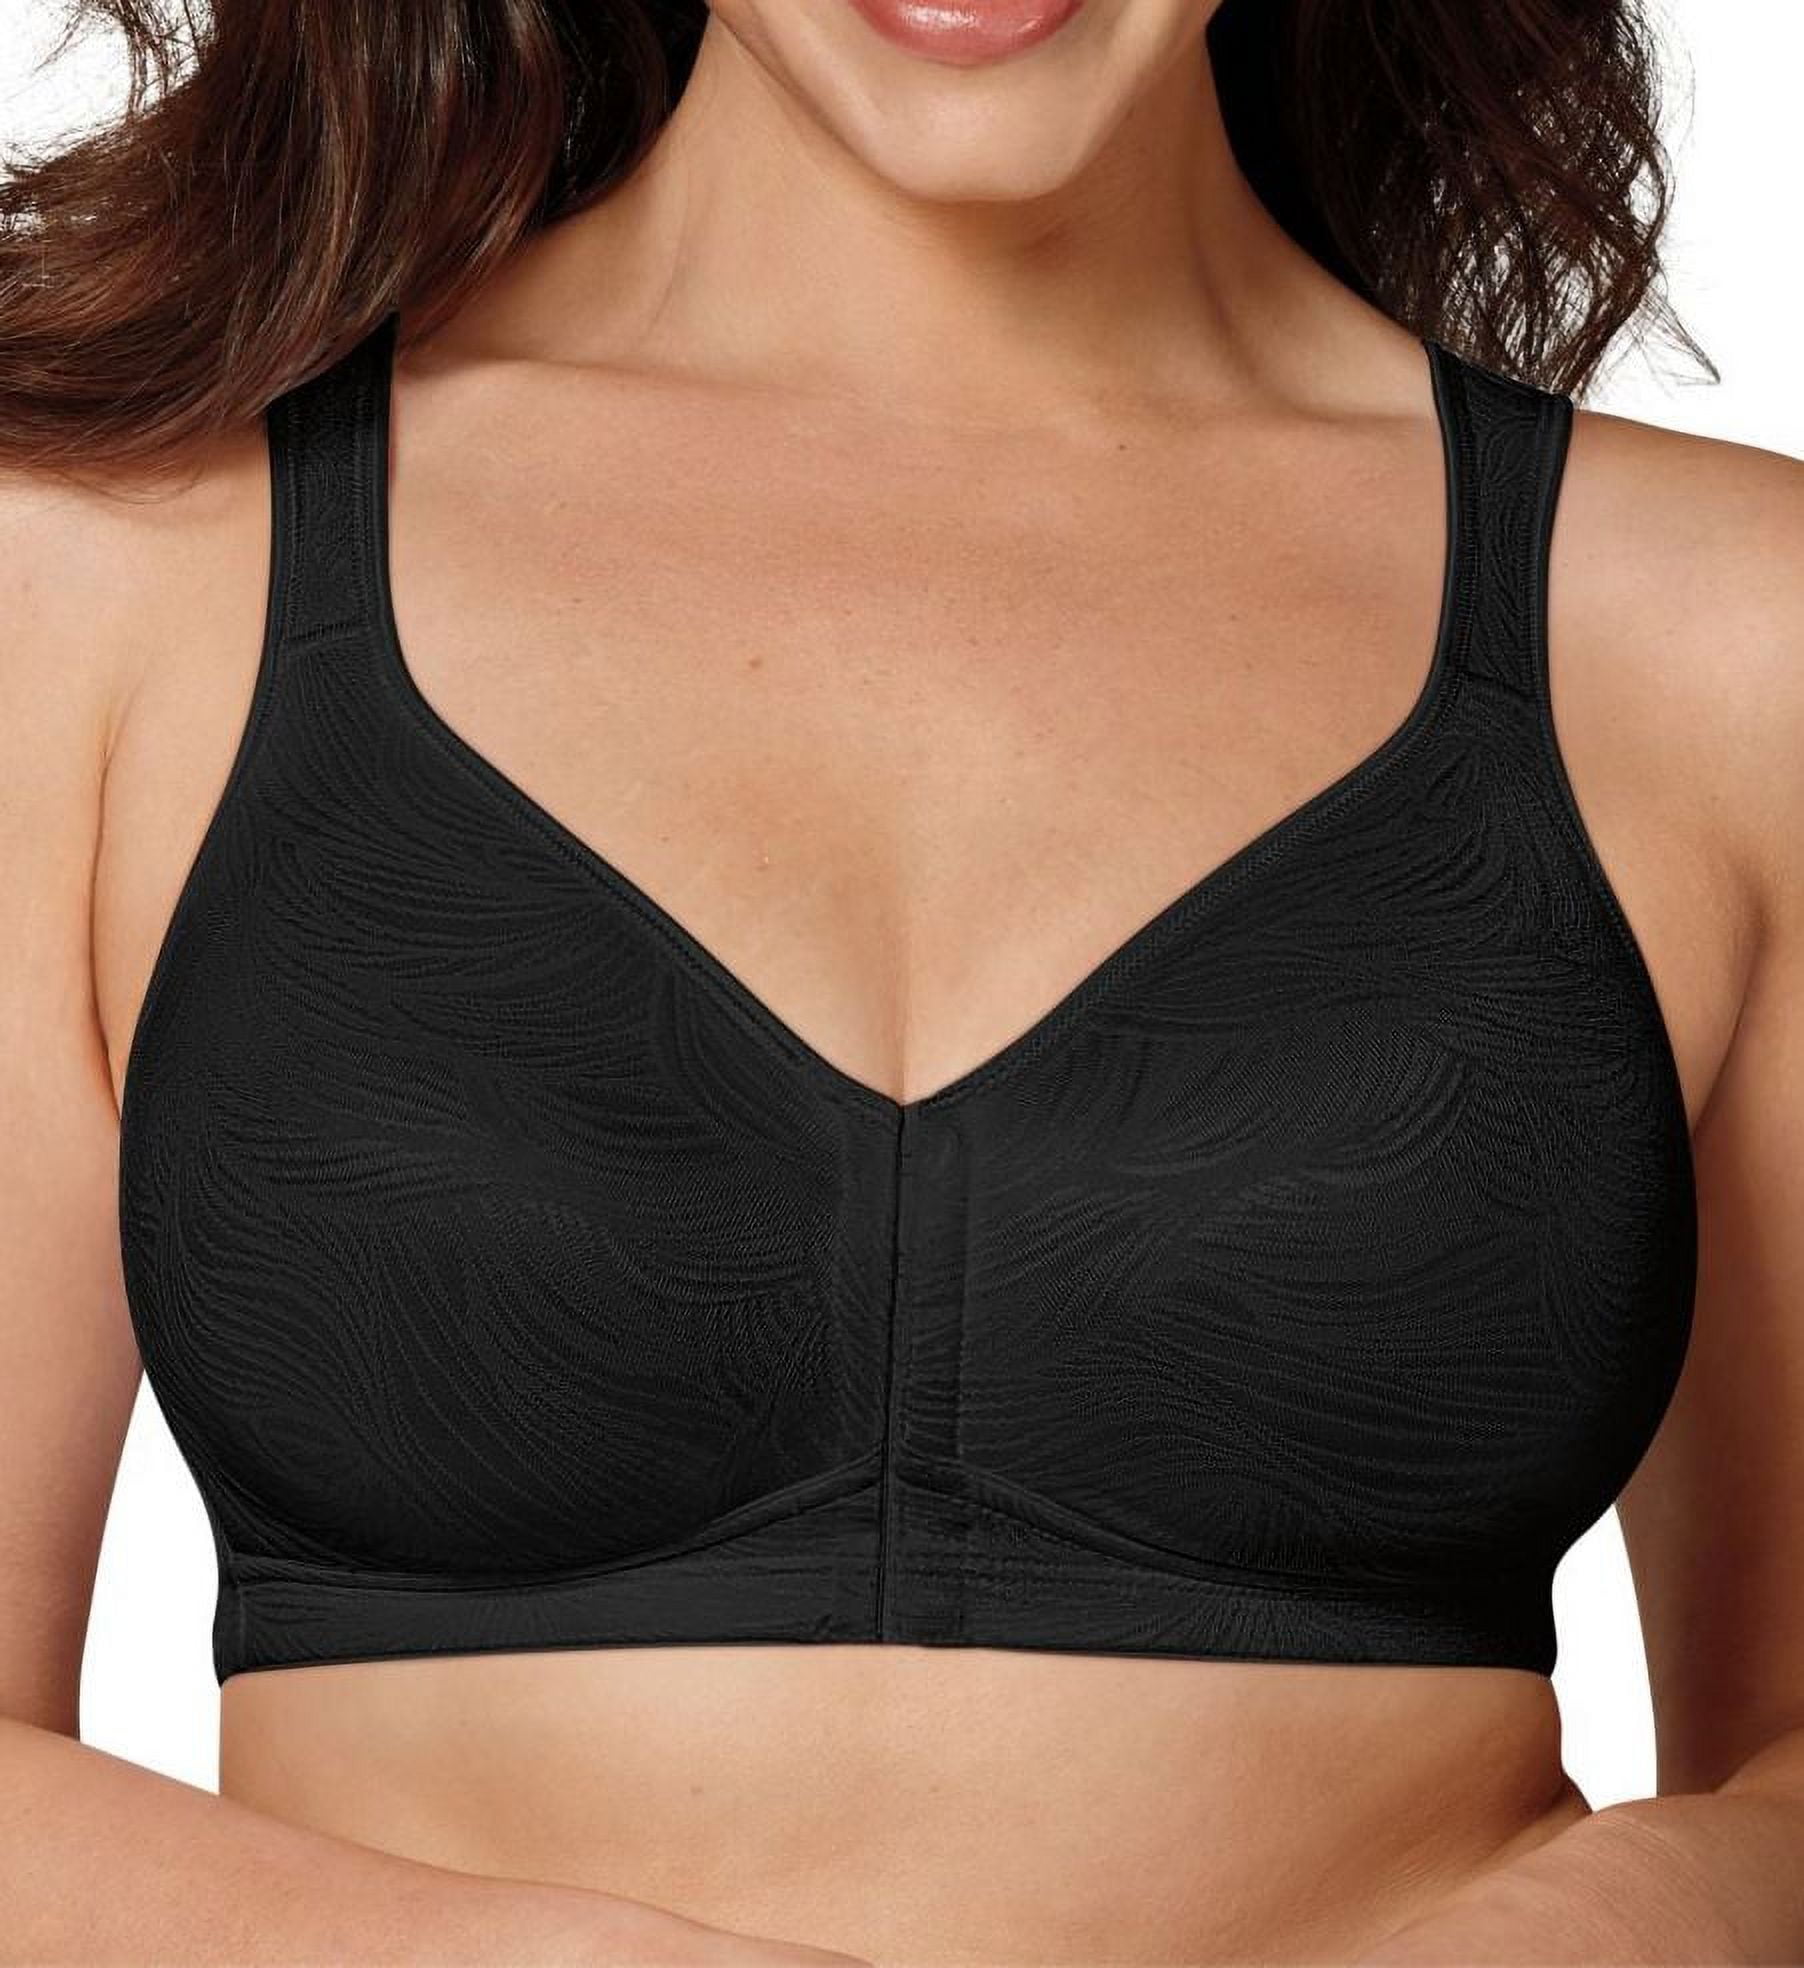 Playtex Bra 34b Style 4003 Cross Your Heart Lined 190102 for sale